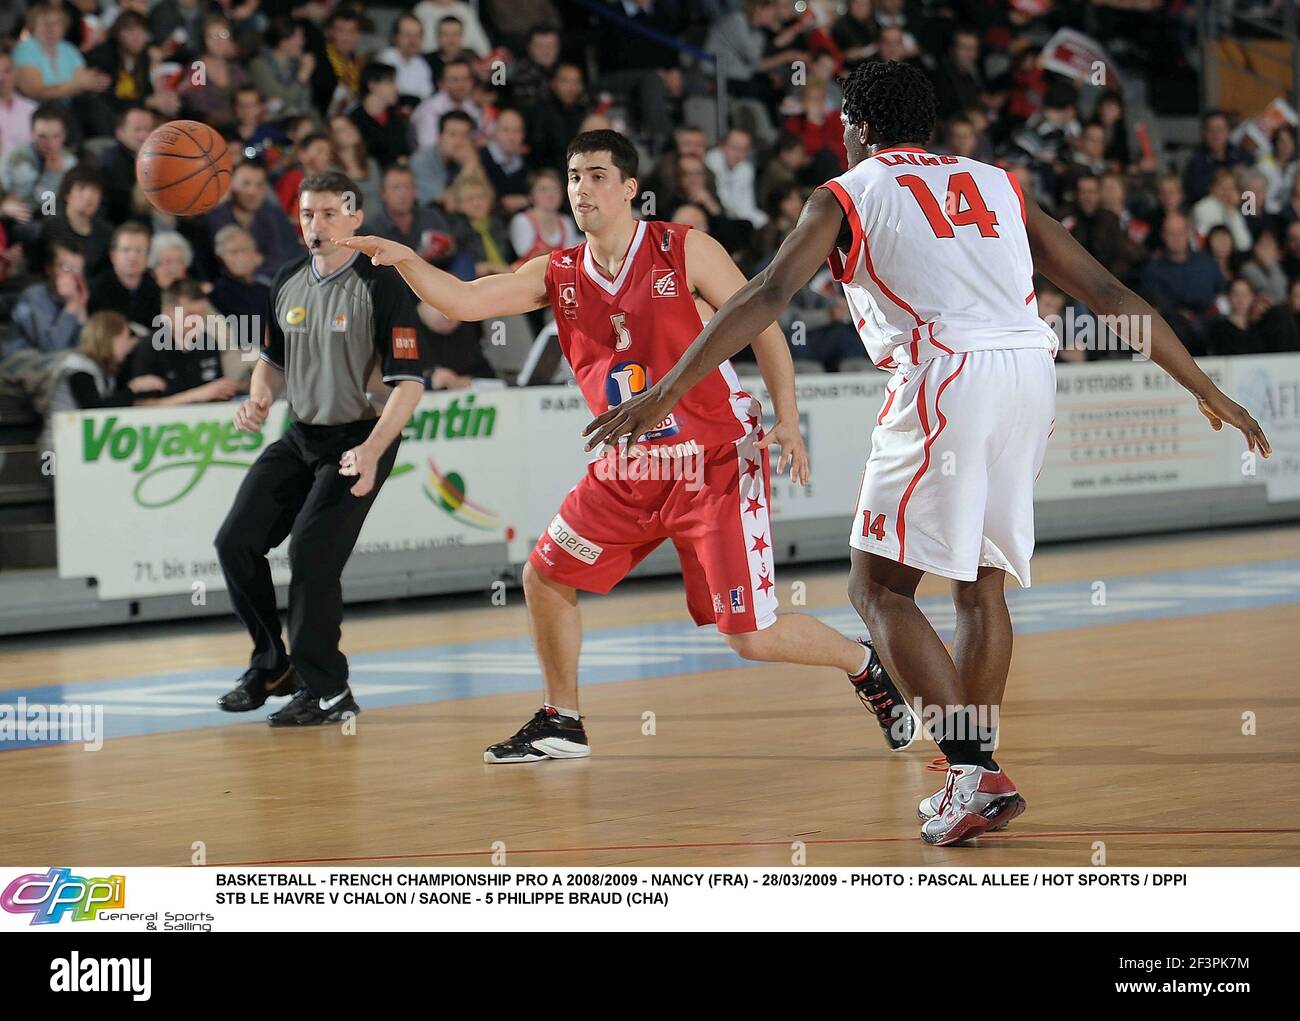 BASKETBALL - FRENCH CHAMPIONSHIP PRO A 2008/2009 - NANCY (FRA) - 28/03/2009  - PHOTO : PASCAL ALLEE / HOT SPORTS / DPPI STB LE HAVRE V CHALON / SAONE -  5 PHILIPPE BRAUD (CHA Stock Photo - Alamy